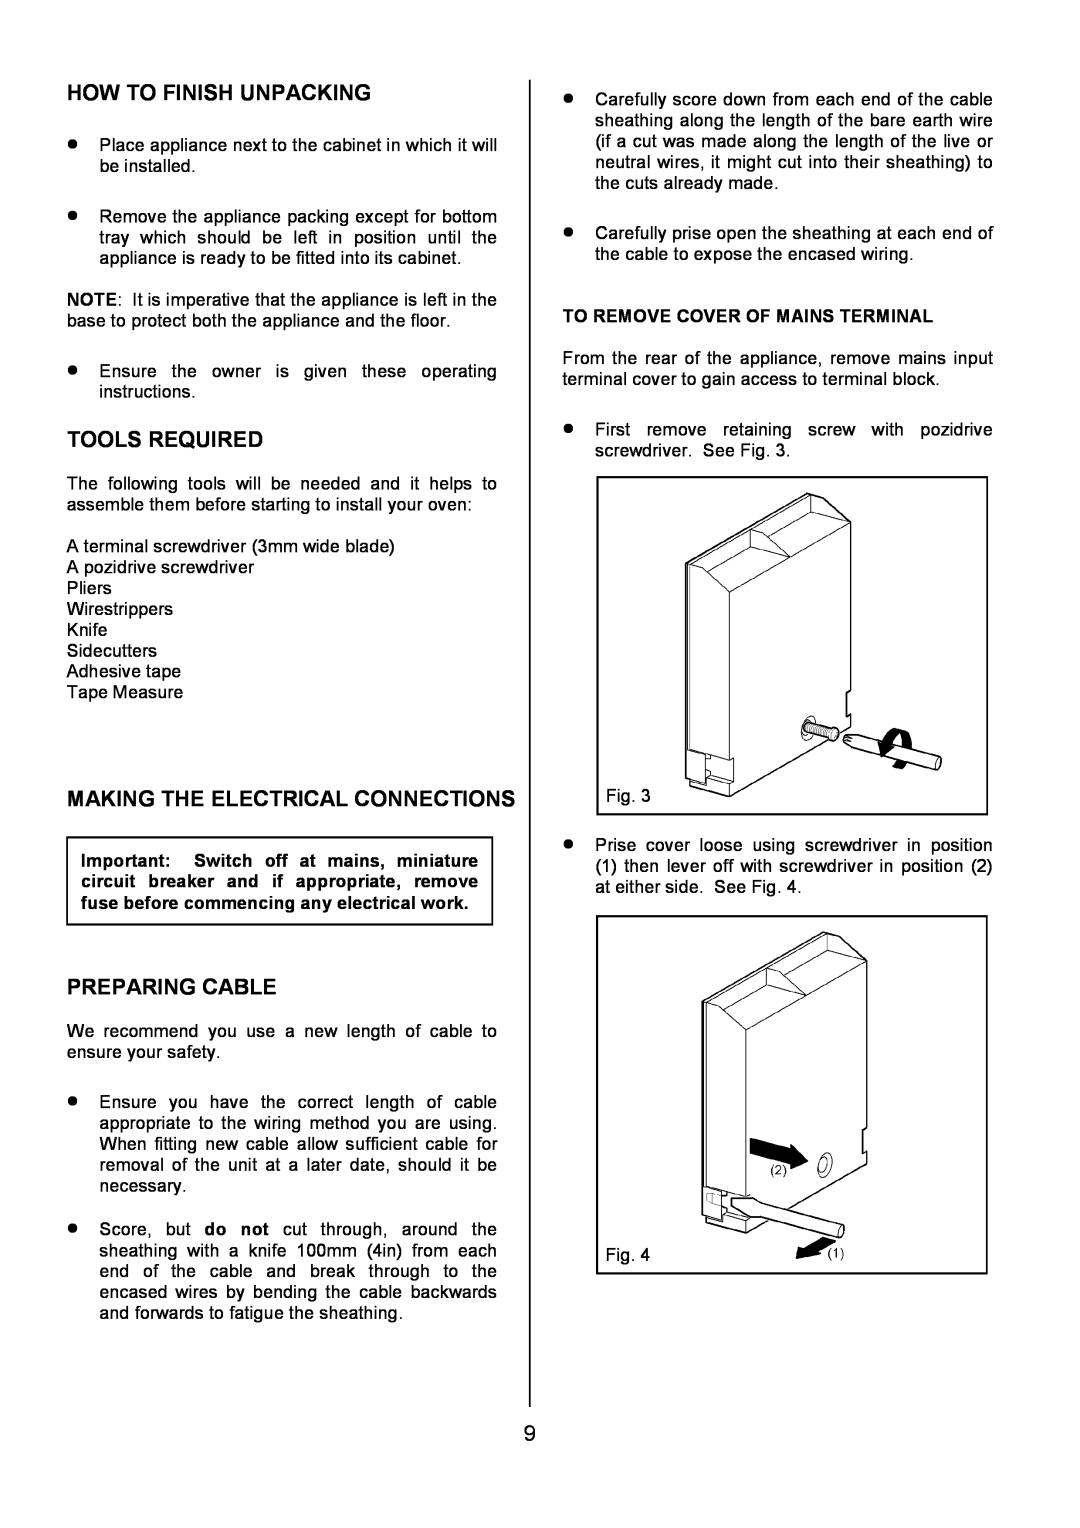 Electrolux EOD5310 manual How To Finish Unpacking, Tools Required, Making The Electrical Connections, Preparing Cable 